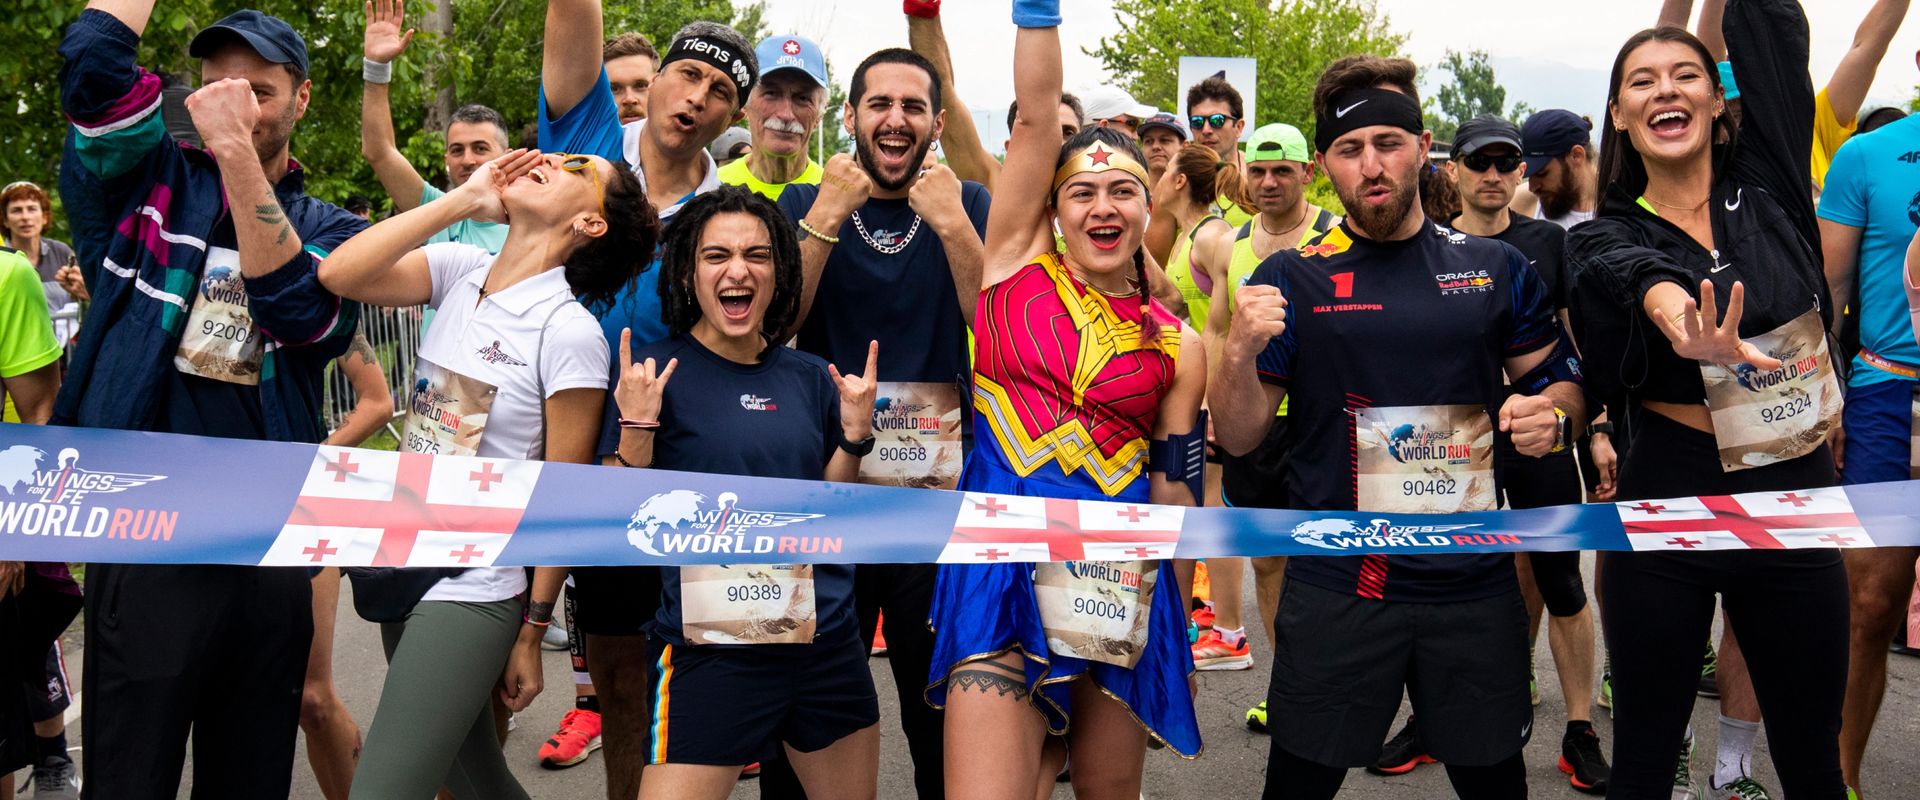 Wings for Life World Run 0